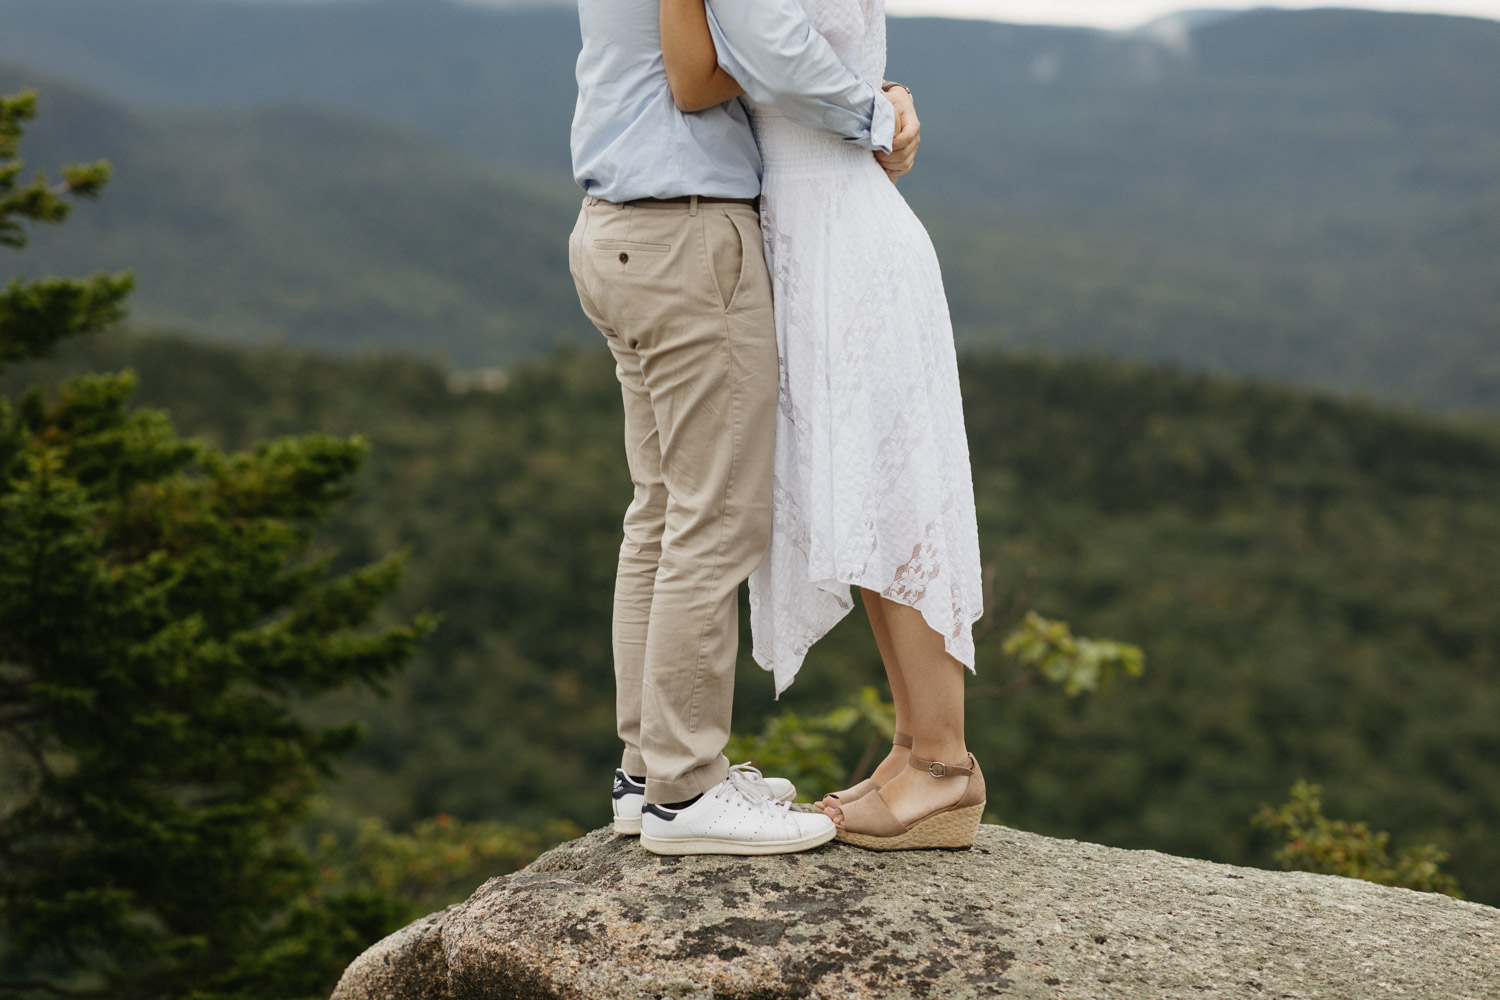 candid shot of the couple during their White mountain engagement photoshoot